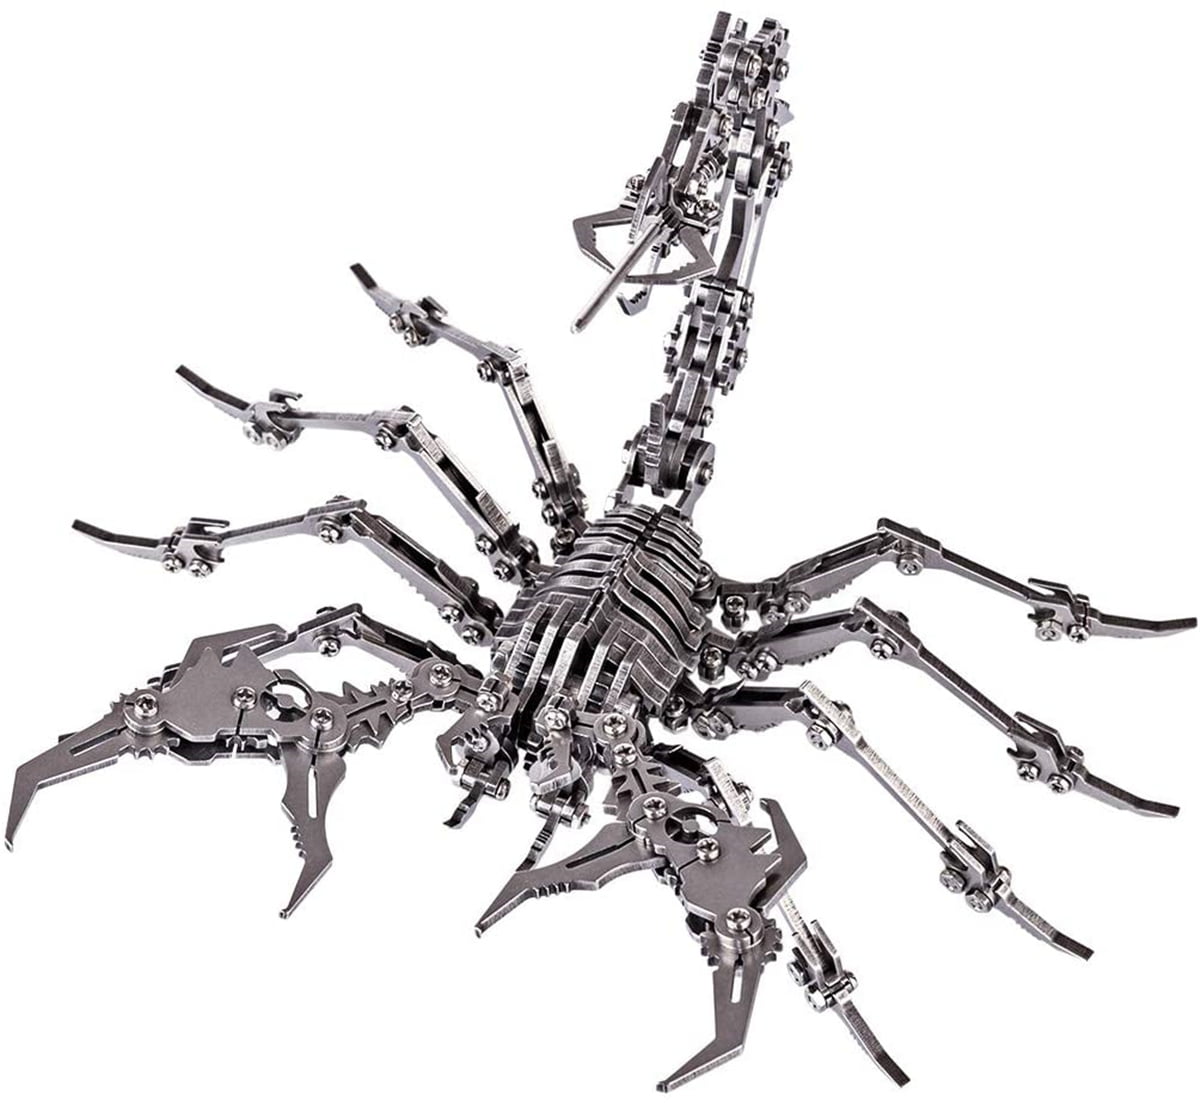 Mania sulfur Should Scorpion 3D Metal Puzzle - Stainless Steel Puzzle Jigsaw Scorpion DIY Model  Kit Detachable Model Puzzle Toys Birthday Gifts for Adults Ornament for  Desk - Walmart.com